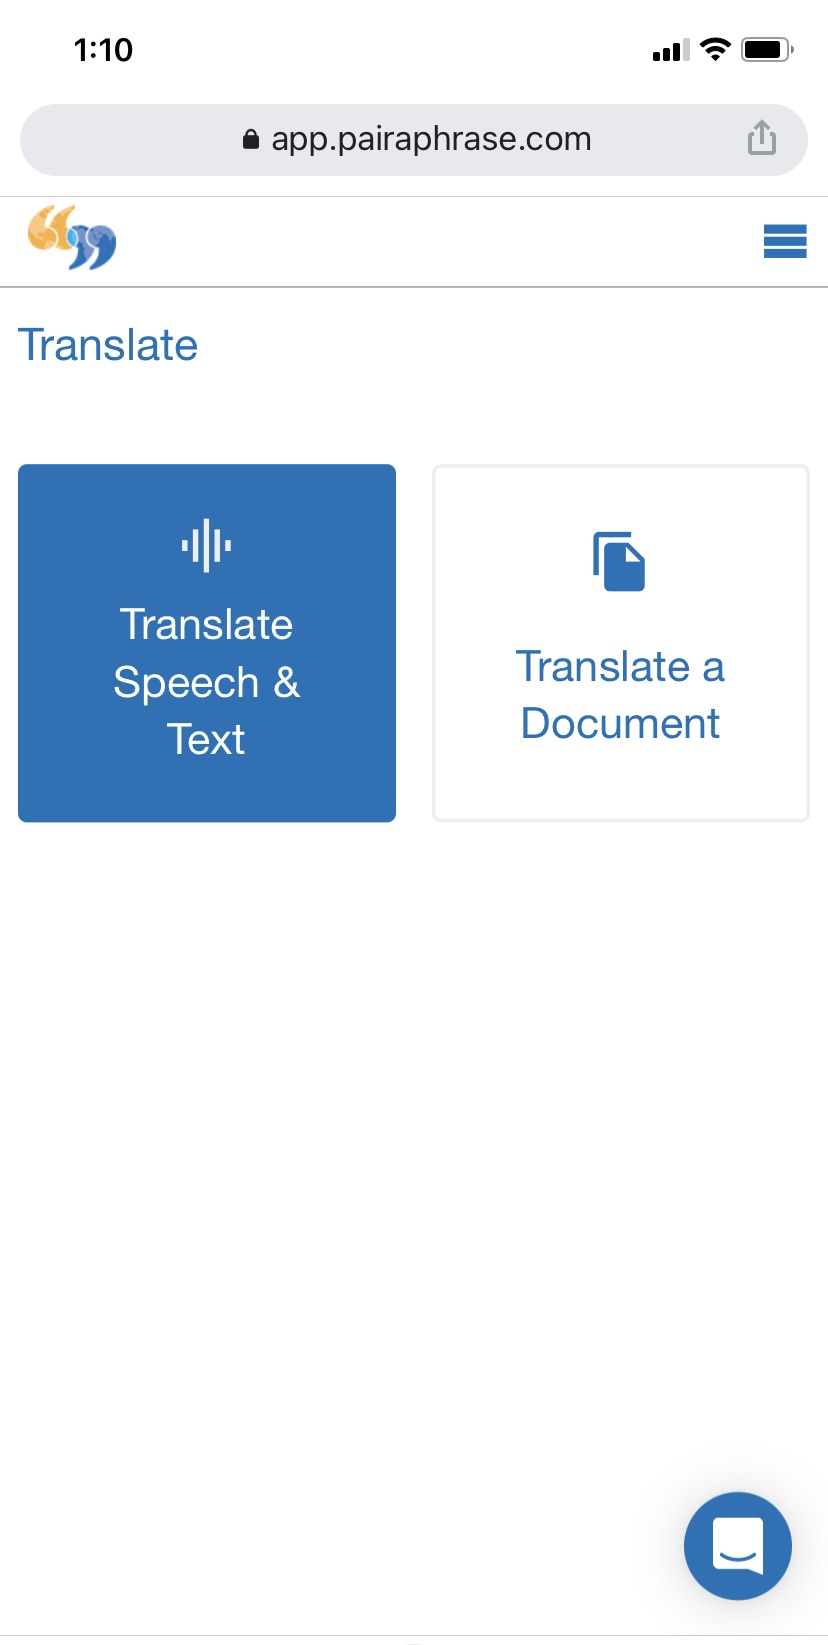 Translate files and perform Speech-to-Speech